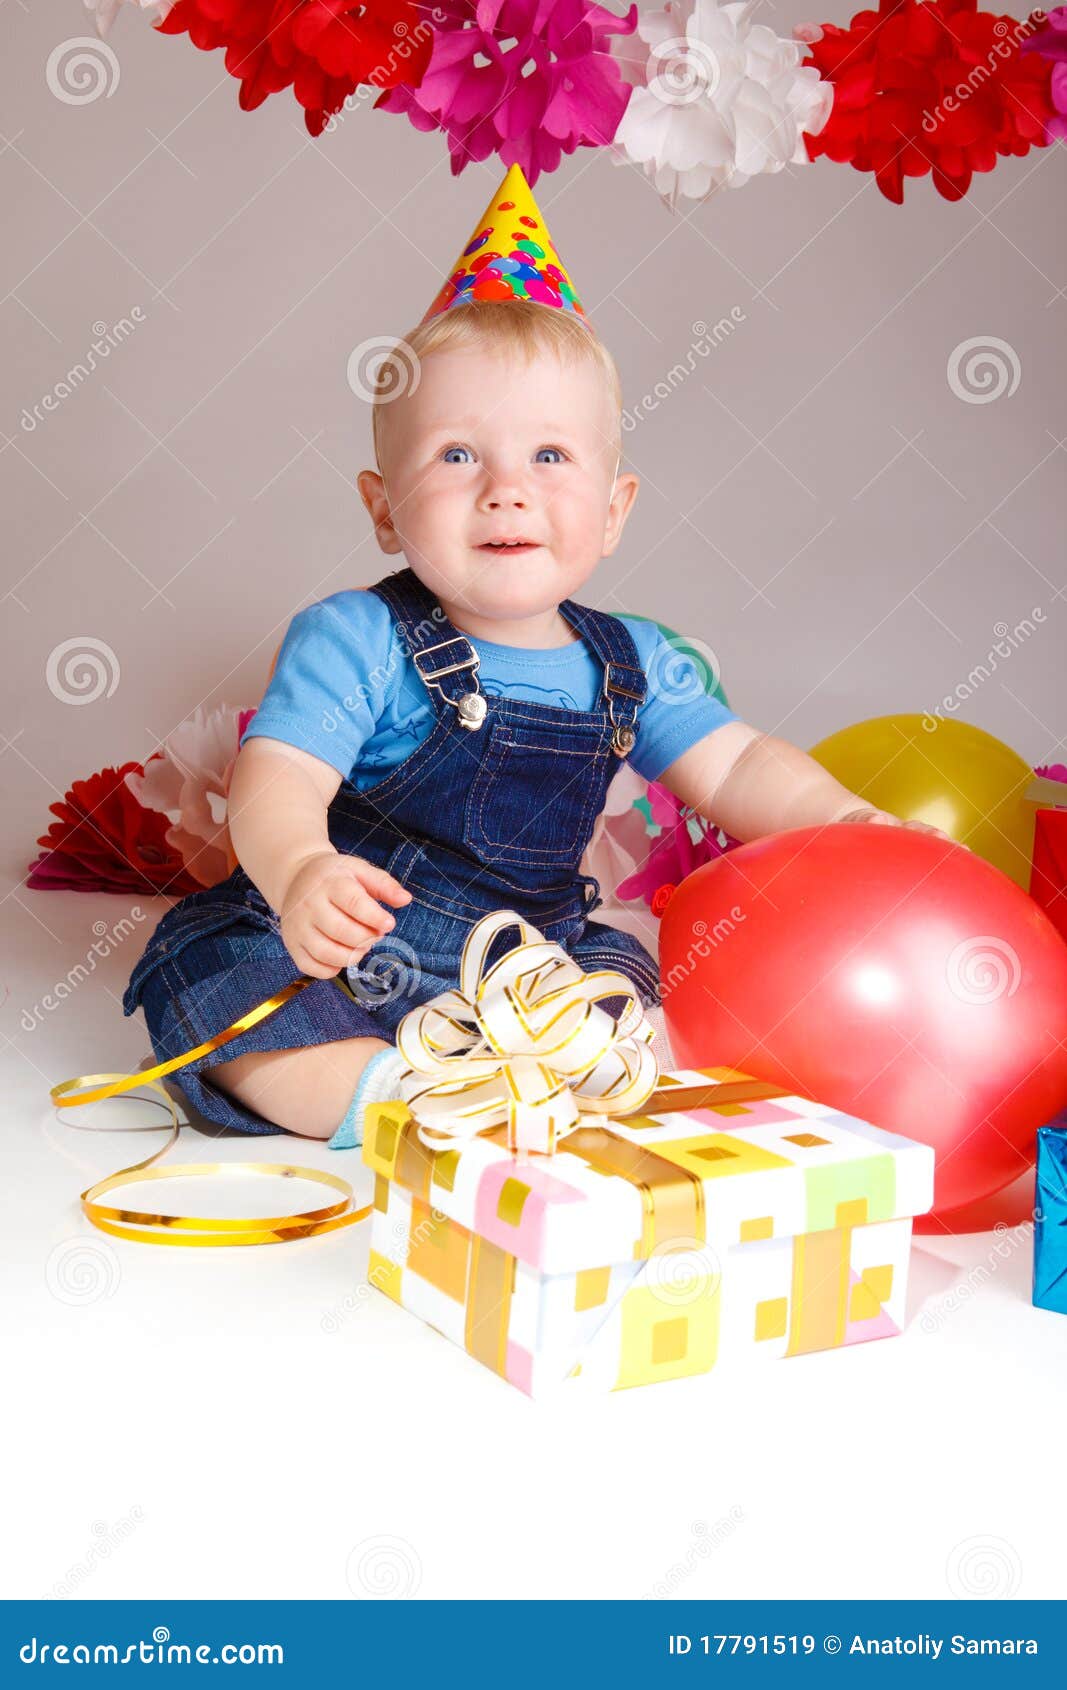 Cheerful Infant in a Party Hat Stock Image - Image of grey, looking ...